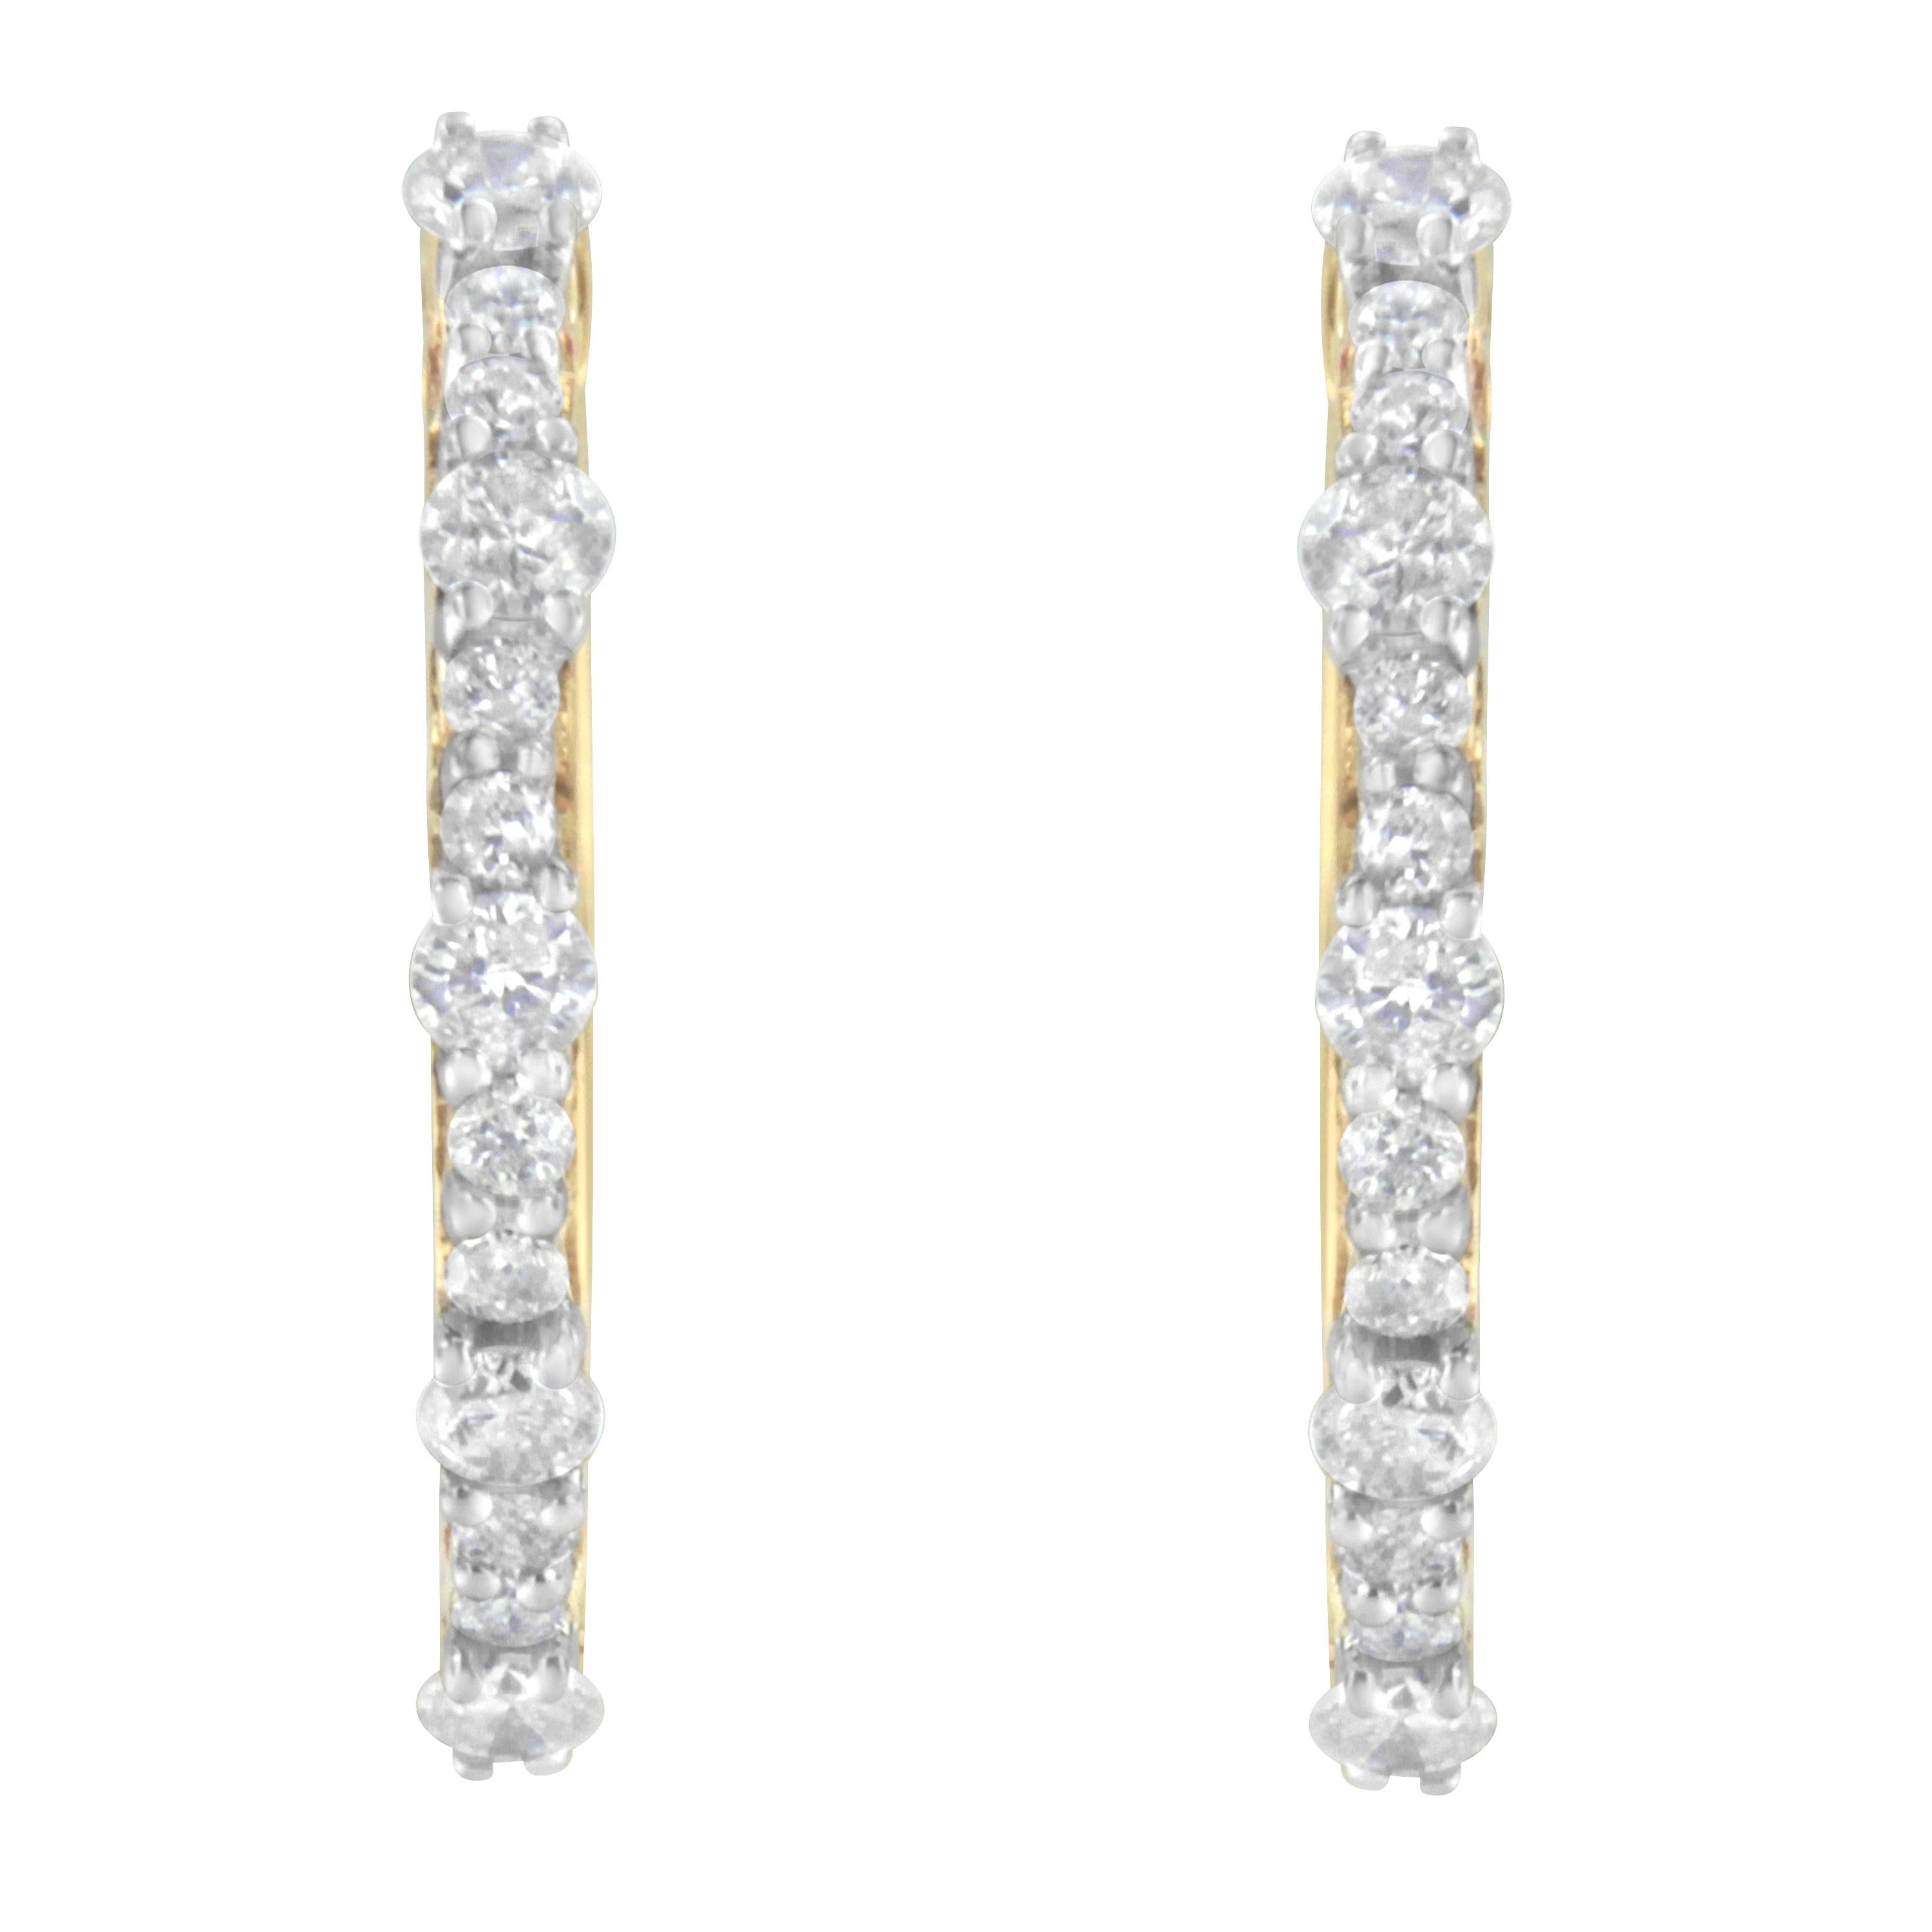 Contemporary 10K Yellow Gold Plated .925 Sterling Silver 1.0 Carat Diamond Hoop Earrings